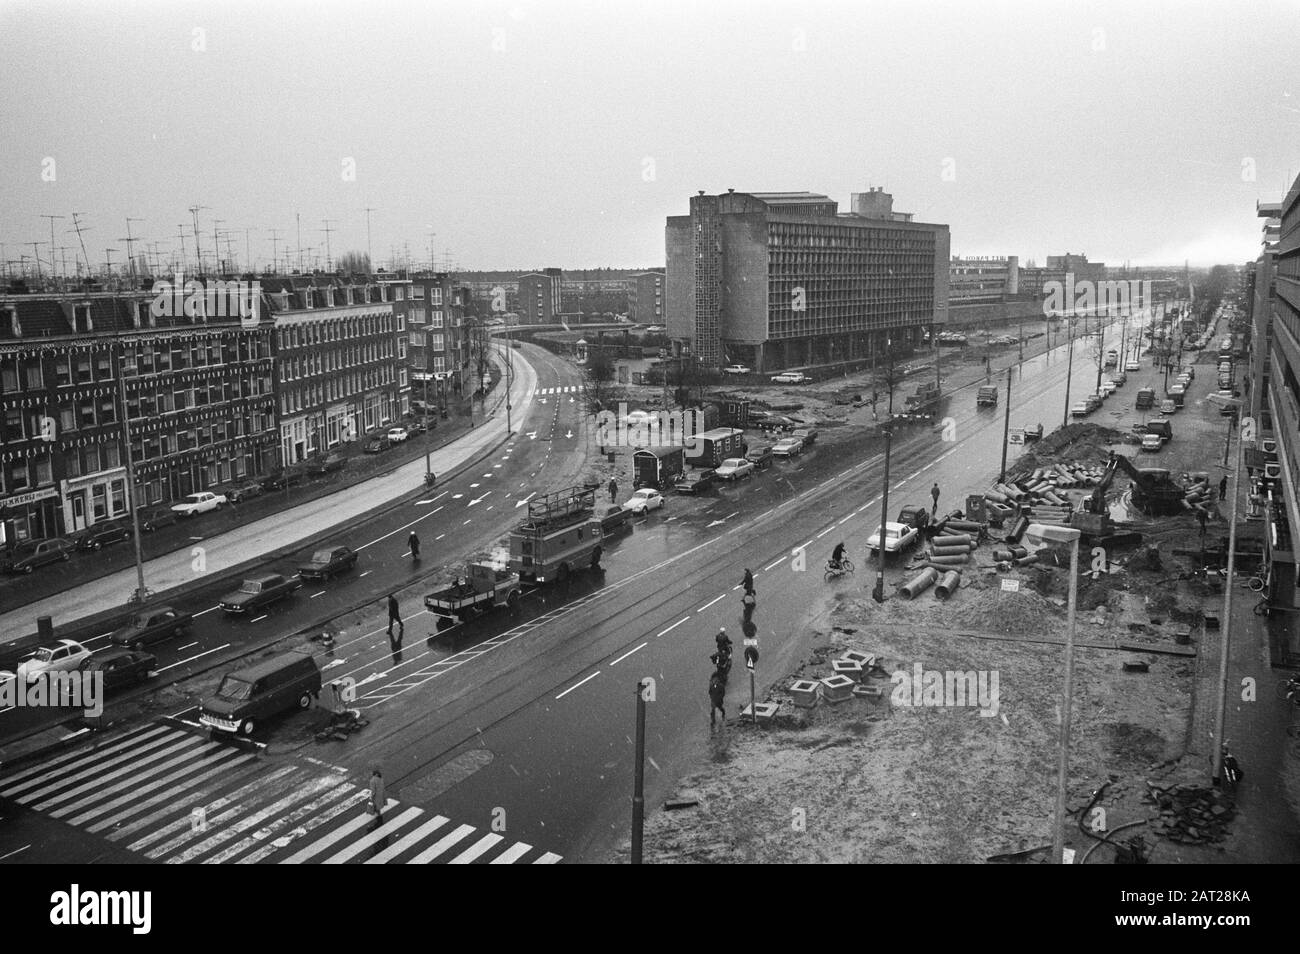 Road diverted due to metro works in Wibautstraat Amsterdam Date: 23 November  1971 Location: Amsterdam, Noord-Holland Stock Photo - Alamy